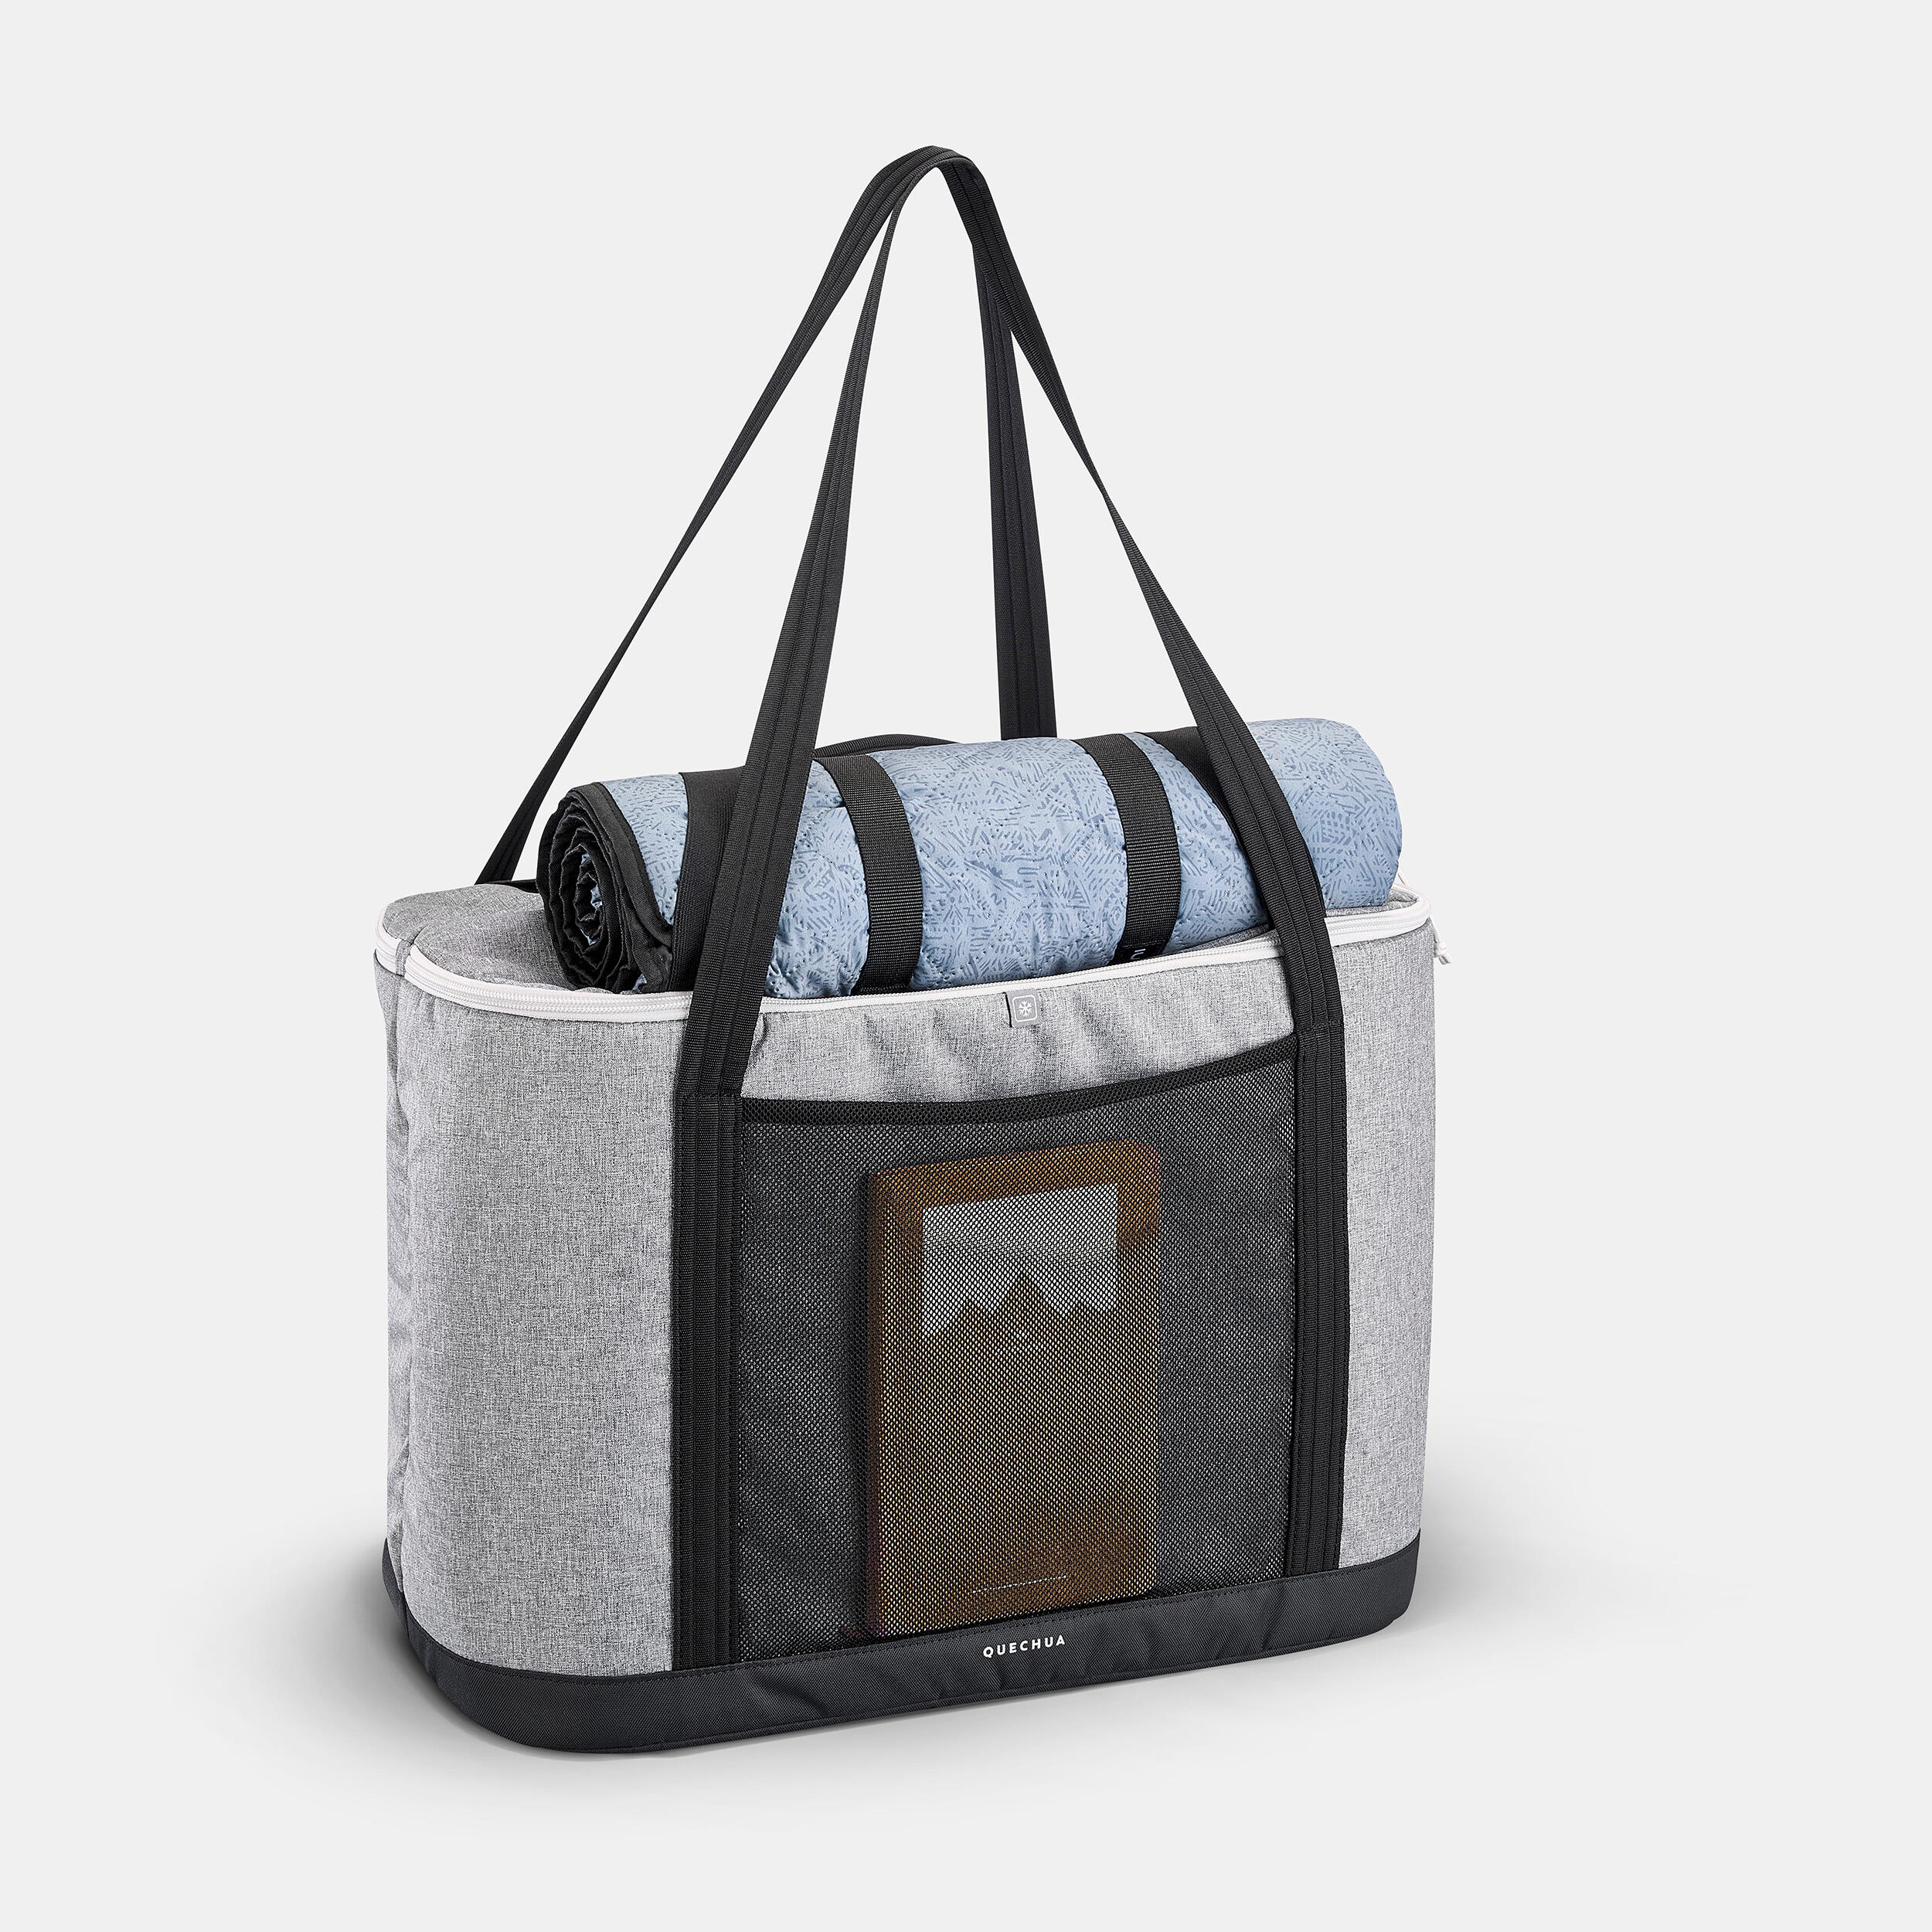 Cooler bag 40 litres - 2 compartments - soft, easy to organise cooler bag  5/9